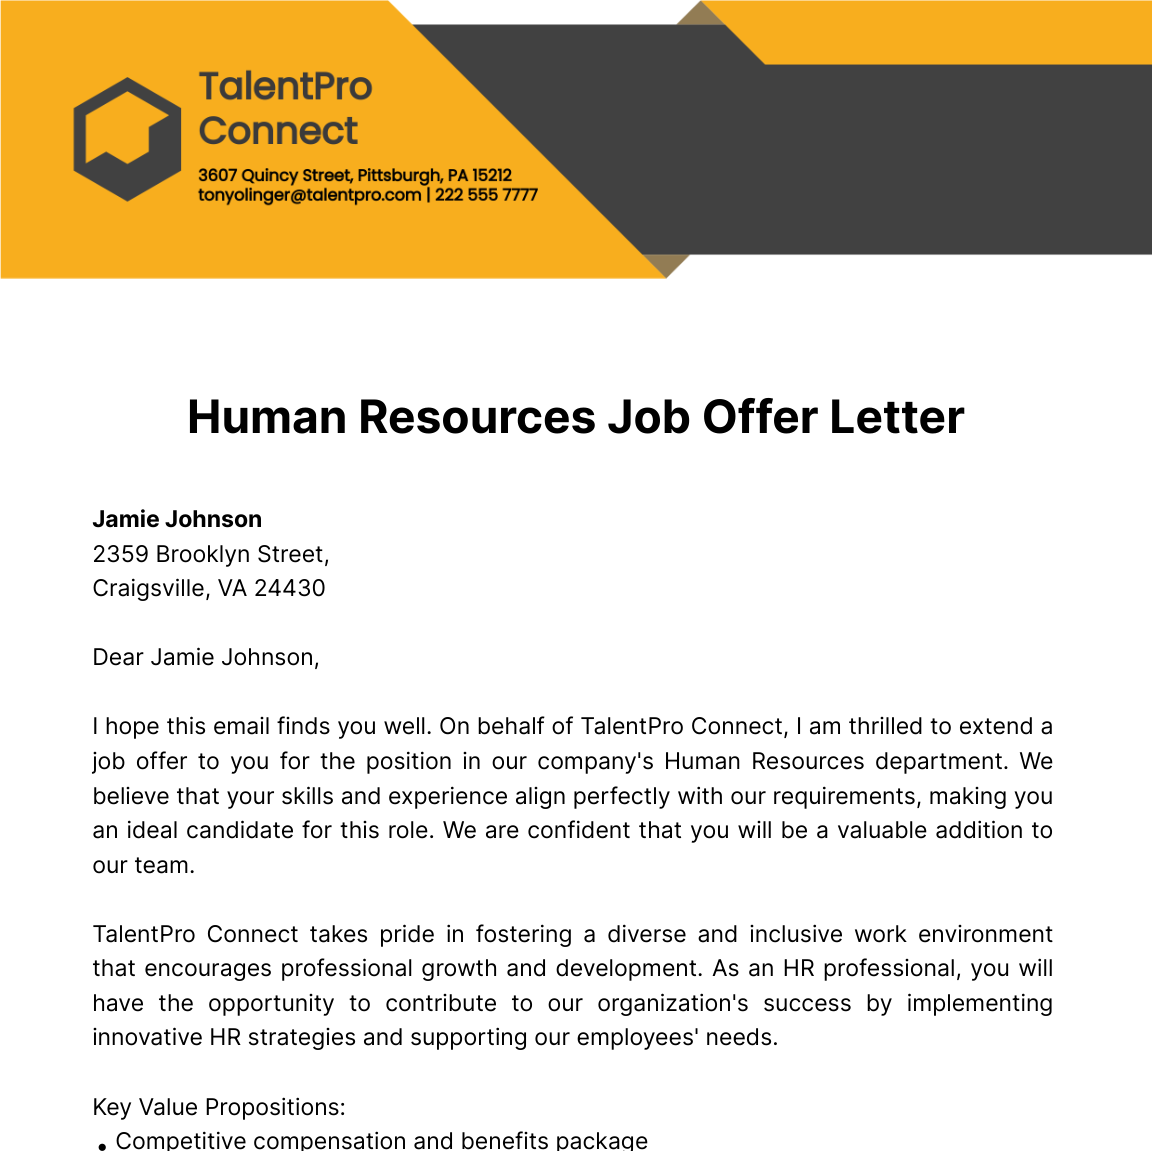 Human Resources Job Offer Letter  Template